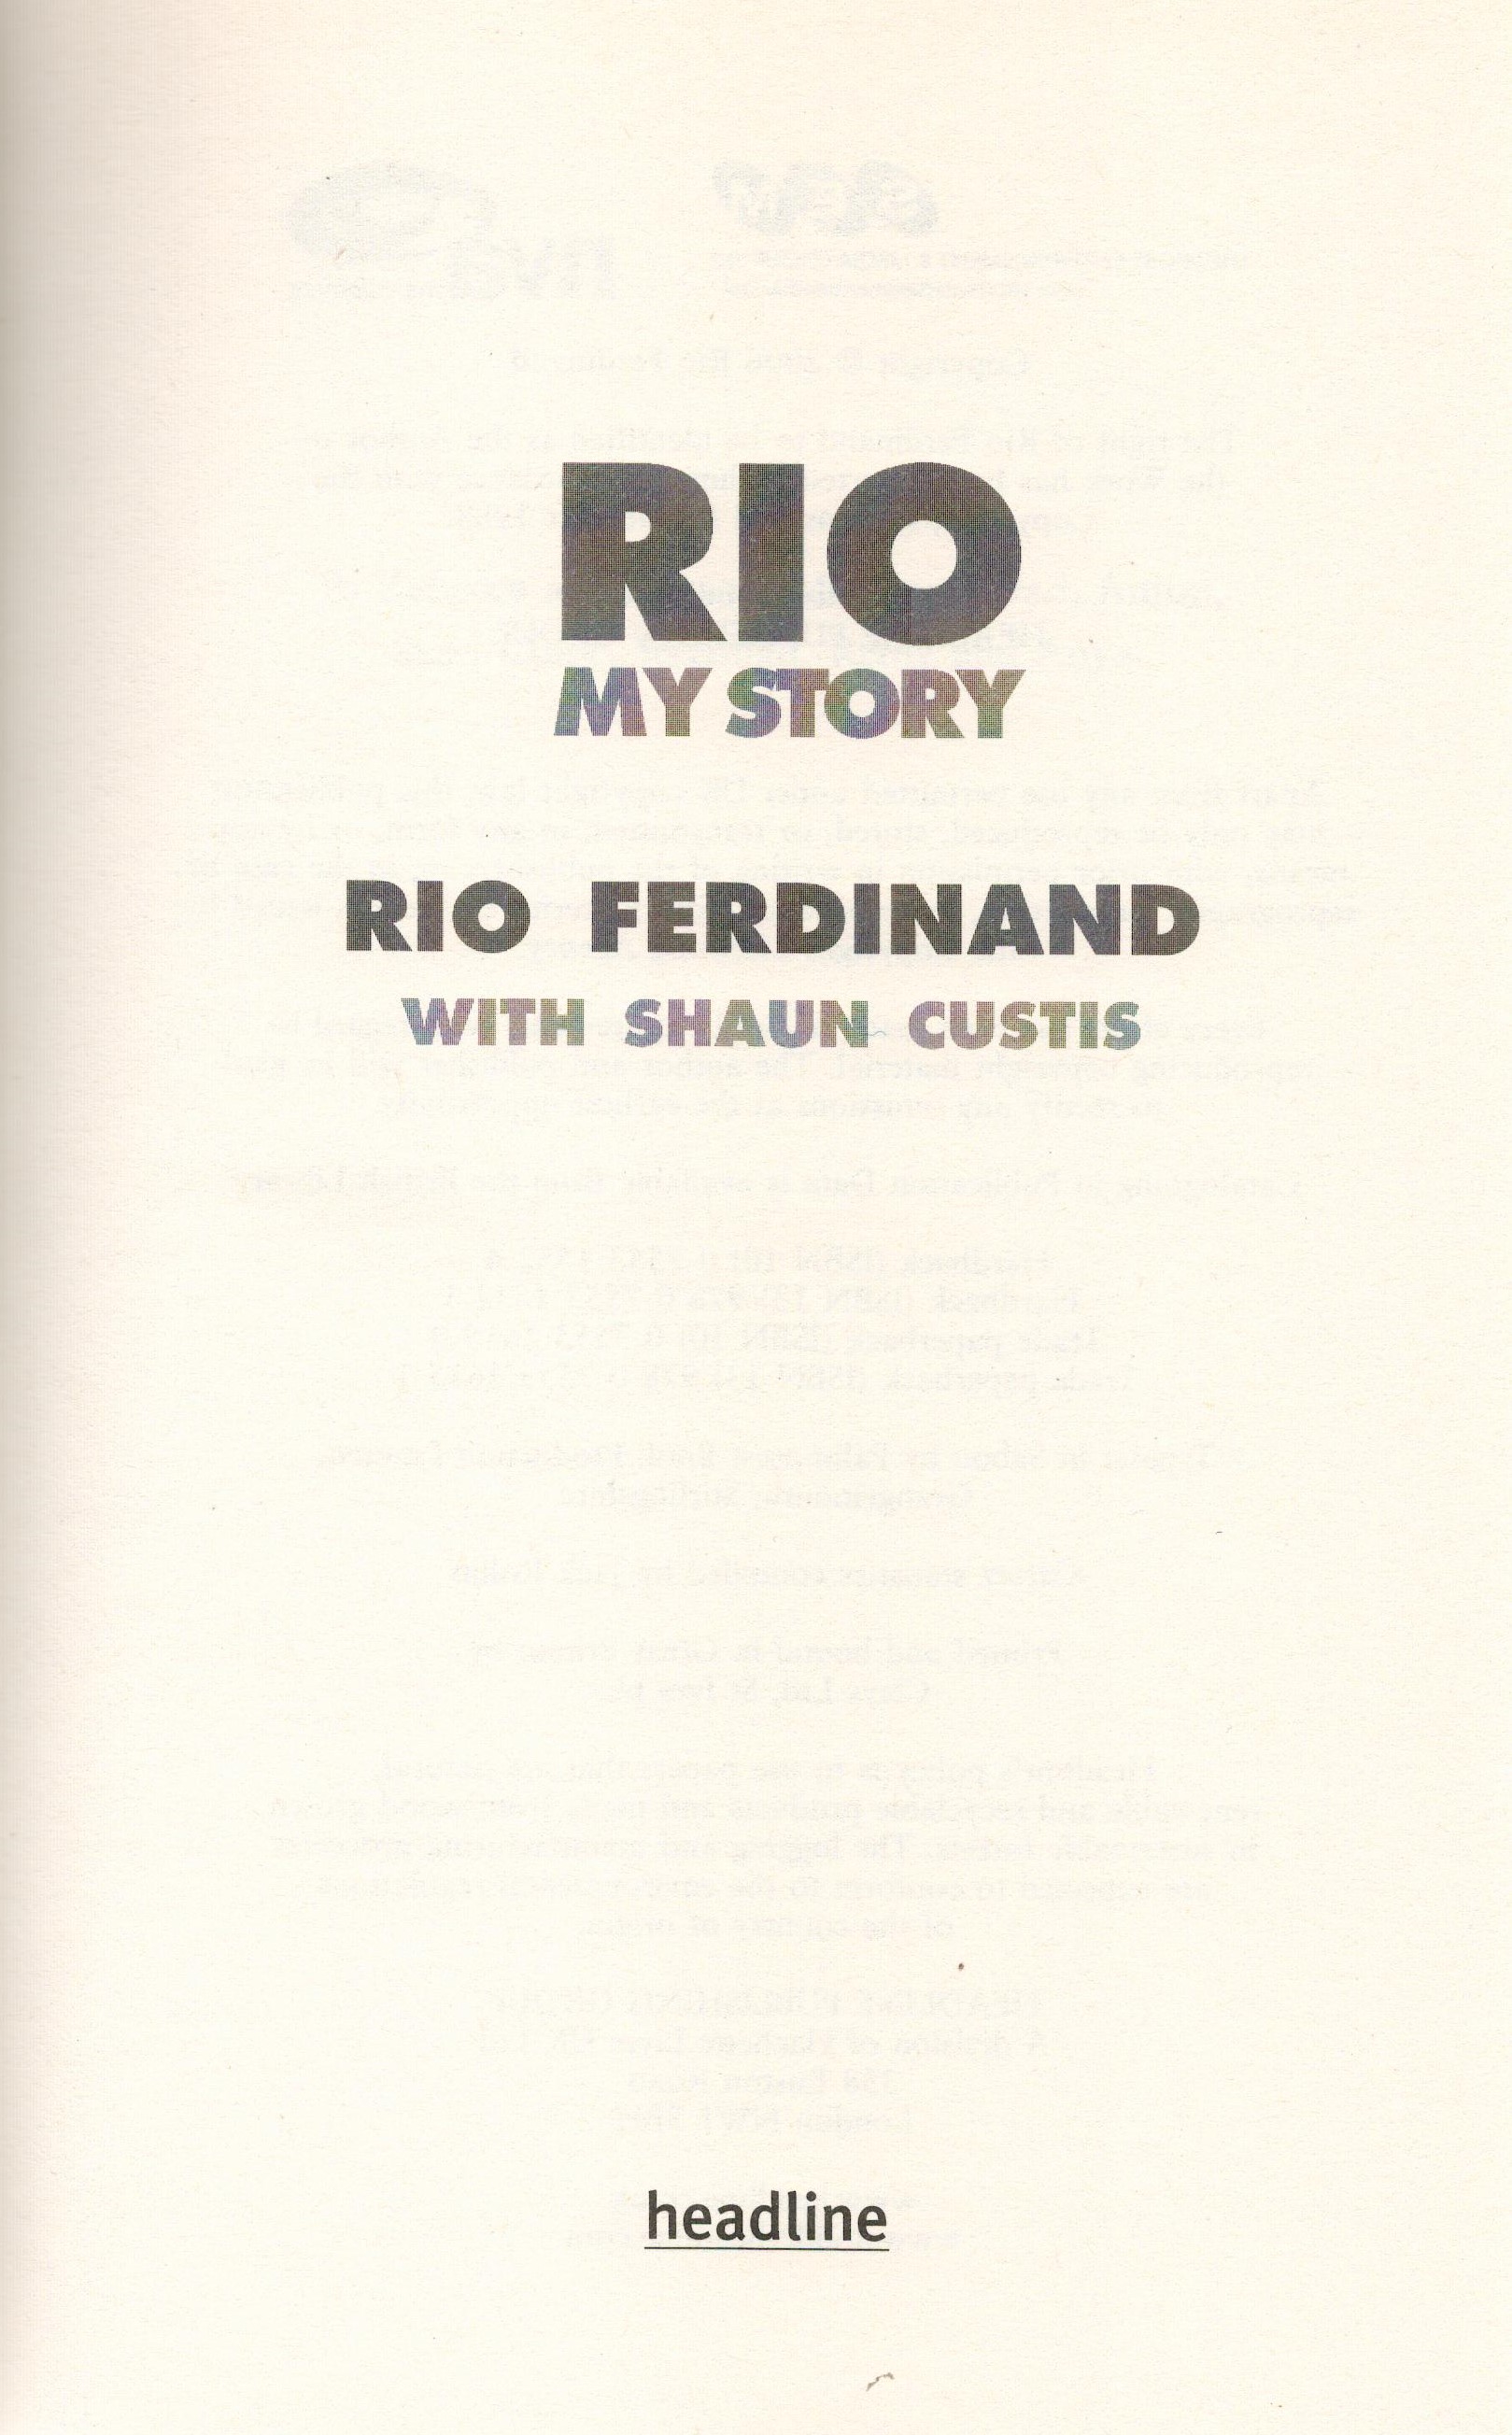 Rio Ferdinand Hand signed First Edition Hardback Book Titled 'Rio-My Story'. Hand signed on front - Image 2 of 3